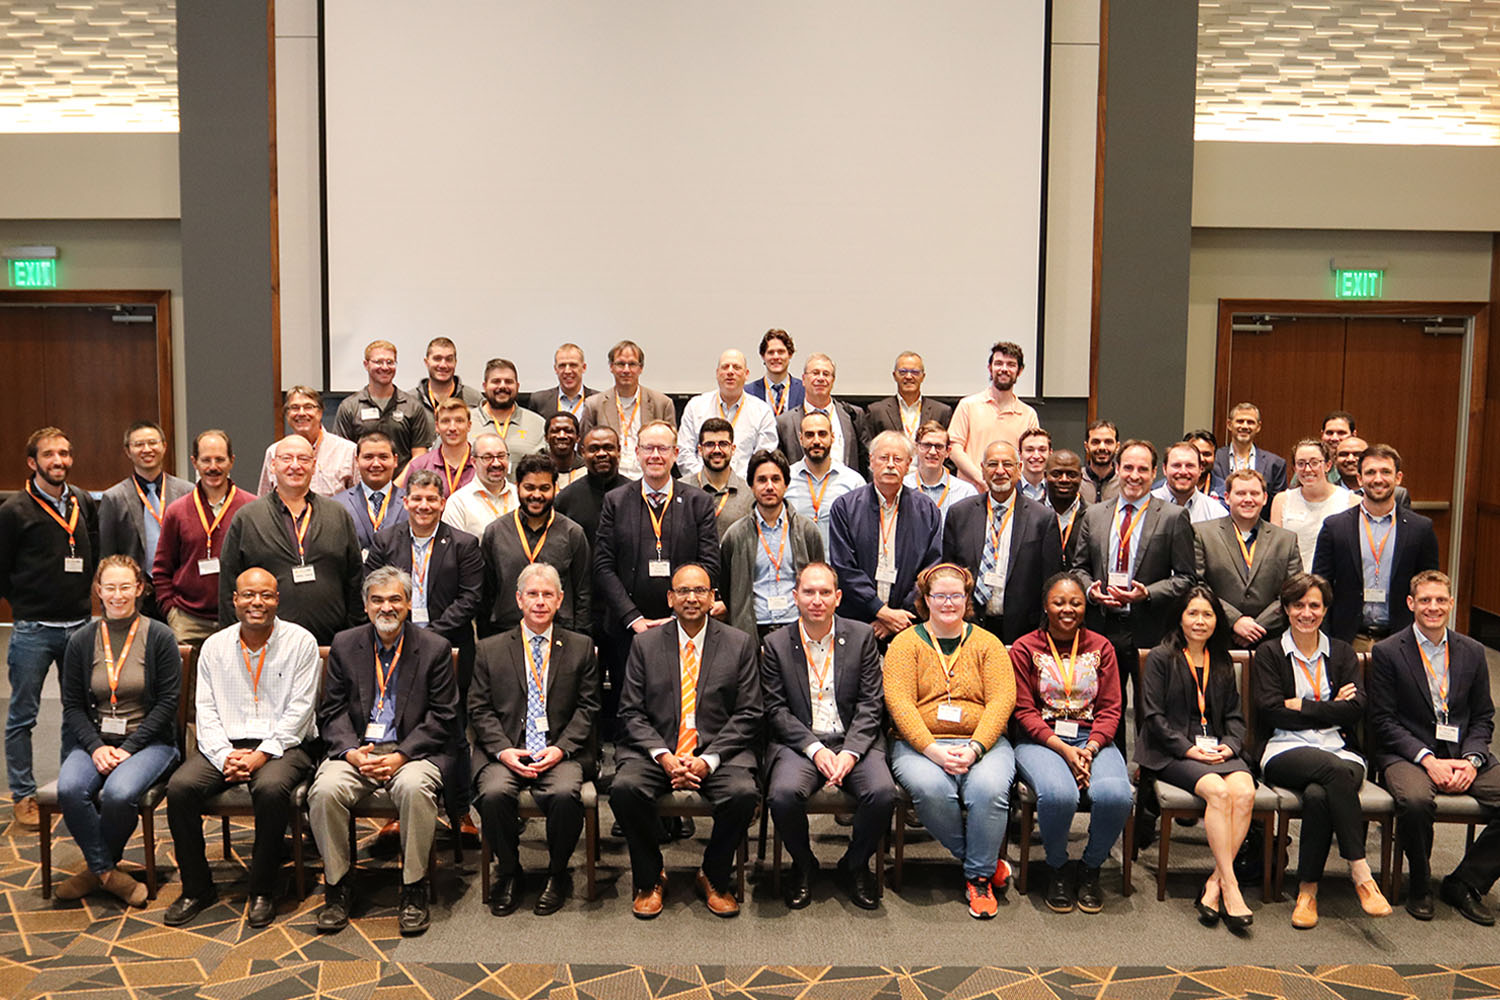 Attendees of the ICSS-13 Conference Pose for Group Photo